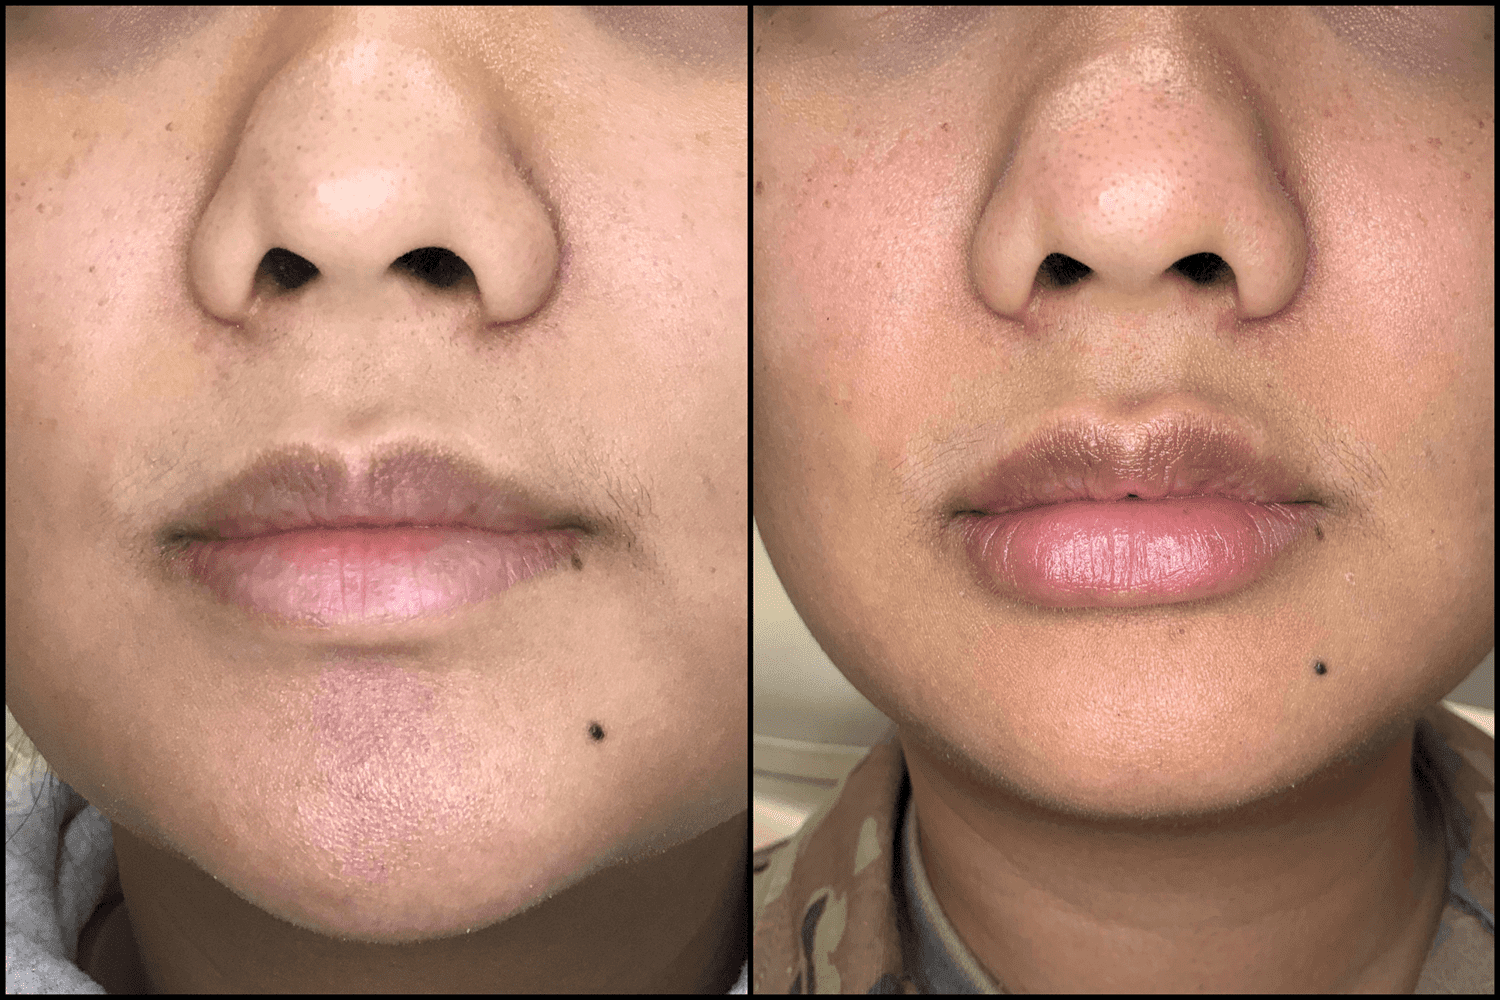 Restylane Kysse patient before and after results